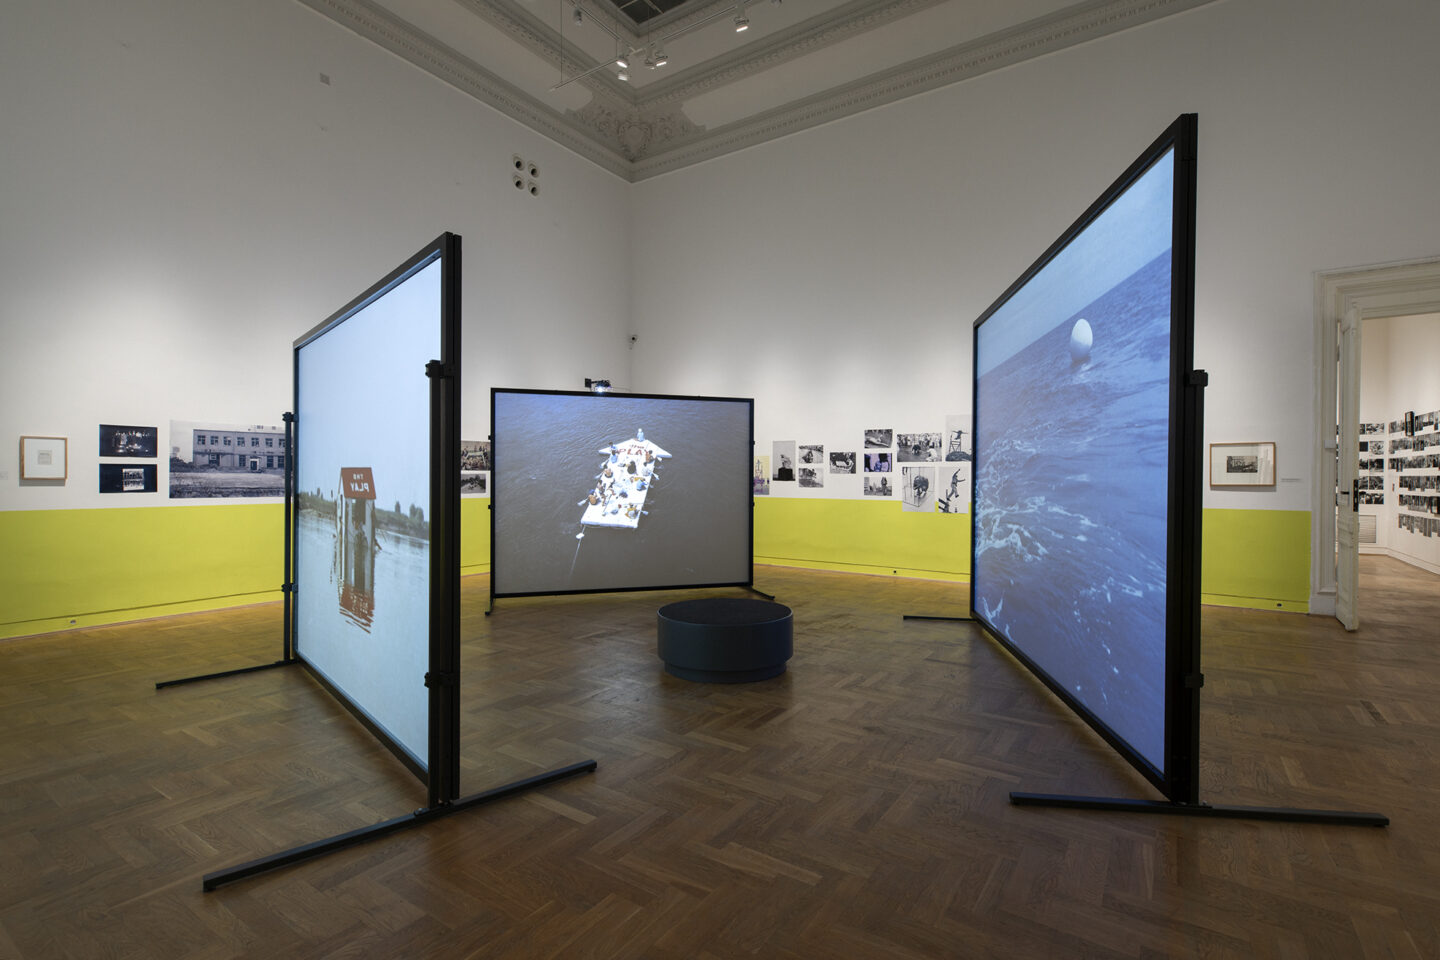 19_The Play at Between Collectivism and Individualism - Japanese Avant-garde_exhibition view_photo Maciej Landsberg © 2021 Zachęta National Gallery of Art